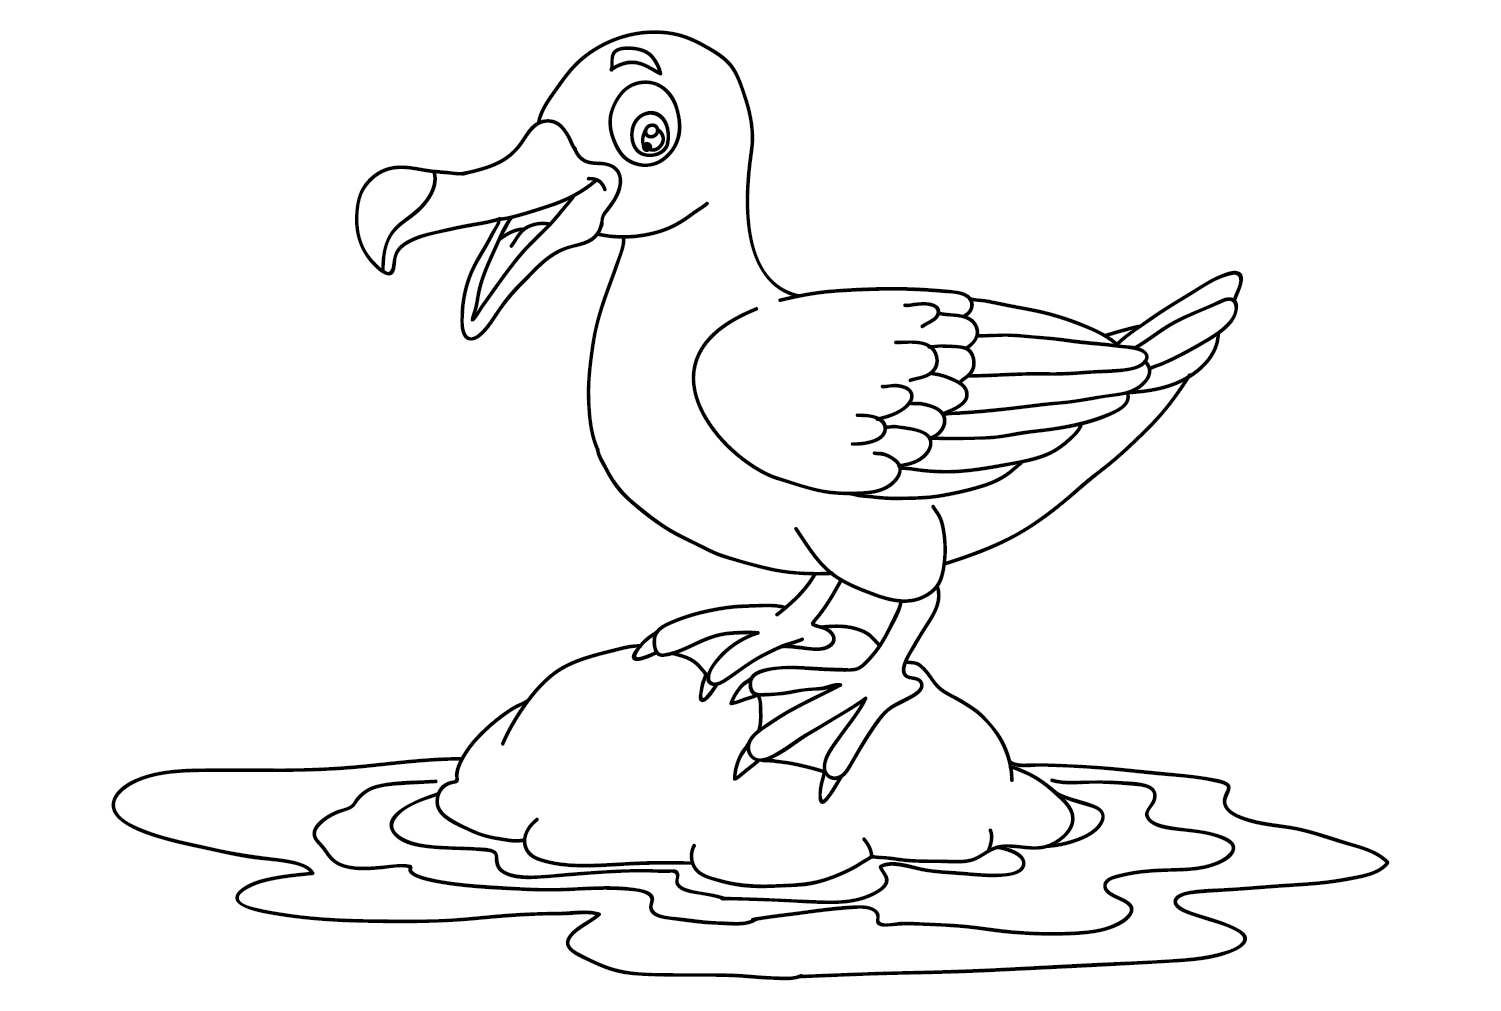 Albatross Coloring Pages Free from Albatross